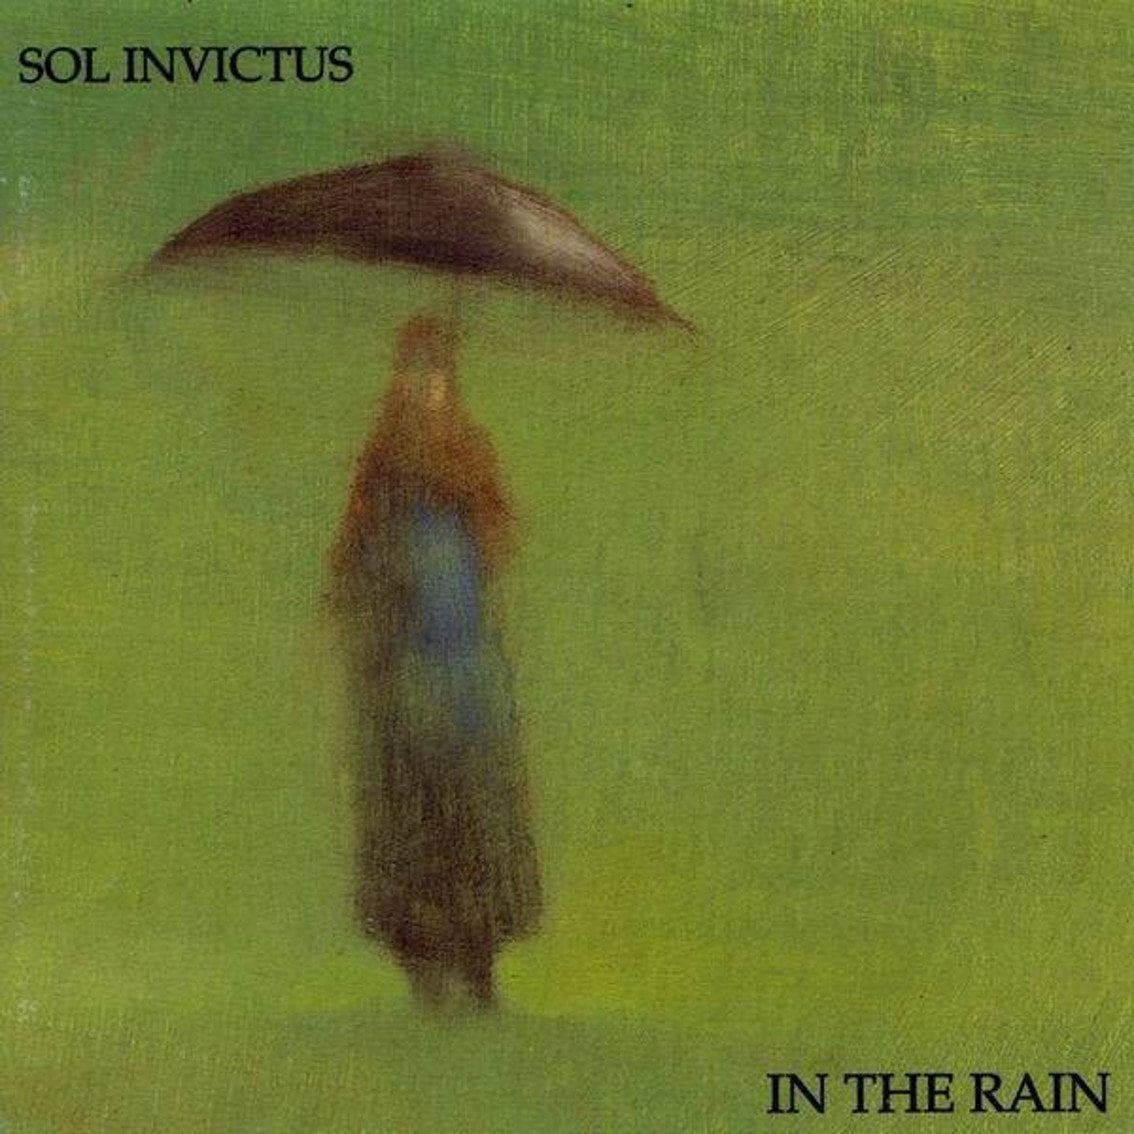 Mega rare vinyl edition of Sol Invictus' 'In The Rain' - 200 copies only, here's how to get yours